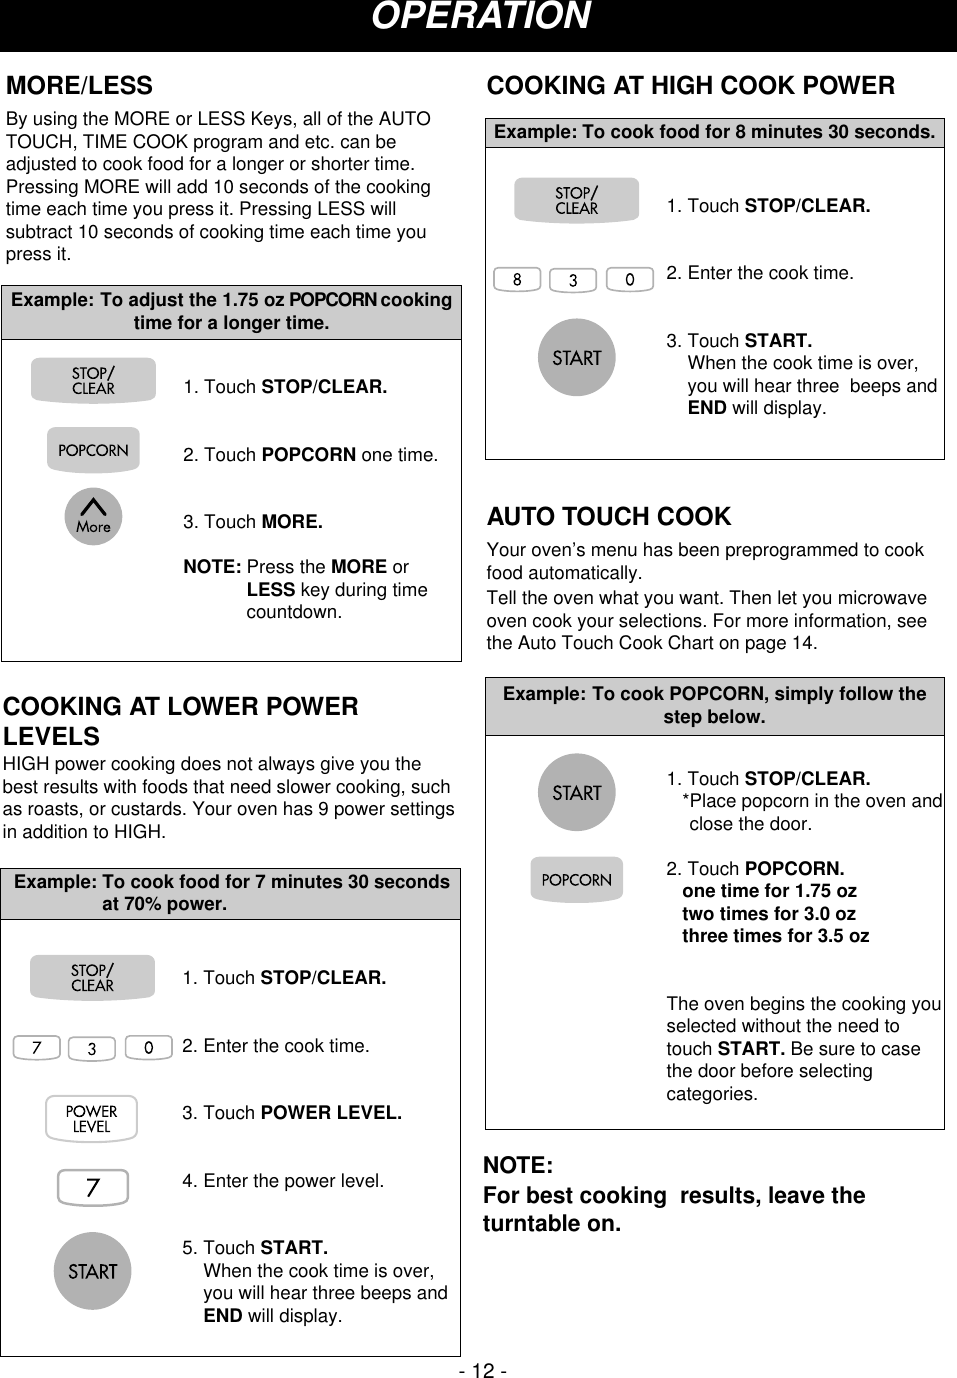 - 12 -OPERATION1. Touch STOP/CLEAR.2. Enter the cook time.3. Touch POWER LEVEL.4. Enter the power level.5. Touch START.When the cook time is over,you will hear three beeps andEND will display.Example: To cook food for 7 minutes 30 secondsat 70% power.COOKING AT LOWER POWERLEVELSHIGH power cooking does not always give you thebest results with foods that need slower cooking, suchas roasts, or custards. Your oven has 9 power settingsin addition to HIGH. COOKING AT HIGH COOK POWER1. Touch STOP/CLEAR.2. Enter the cook time.3. Touch START.When the cook time is over,you will hear three  beeps andEND will display.Example: To cook food for 8 minutes 30 seconds.AUTO TOUCH COOKYour oven’s menu has been preprogrammed to cookfood automatically.Tell the oven what you want. Then let you microwaveoven cook your selections. For more information, seethe Auto Touch Cook Chart on page 14.1. Touch STOP/CLEAR.*Place popcorn in the oven andclose the door.2. Touch POPCORN.one time for 1.75 oztwo times for 3.0 ozthree times for 3.5 ozThe oven begins the cooking youselected without the need totouch START. Be sure to casethe door before selectingcategories.Example: To cook POPCORN, simply follow thestep below.MORE/LESSBy using the MORE or LESS Keys, all of the AUTOTOUCH, TIME COOK program and etc. can beadjusted to cook food for a longer or shorter time.Pressing MORE will add 10 seconds of the cookingtime each time you press it. Pressing LESS willsubtract 10 seconds of cooking time each time youpress it.1. Touch STOP/CLEAR.2. Touch POPCORN one time.3. Touch MORE.NOTE: Press the MORE orLESS key during timecountdown.Example: To adjust the 1.75 oz POPCORN cookingtime for a longer time.NOTE: For best cooking  results, leave theturntable on.